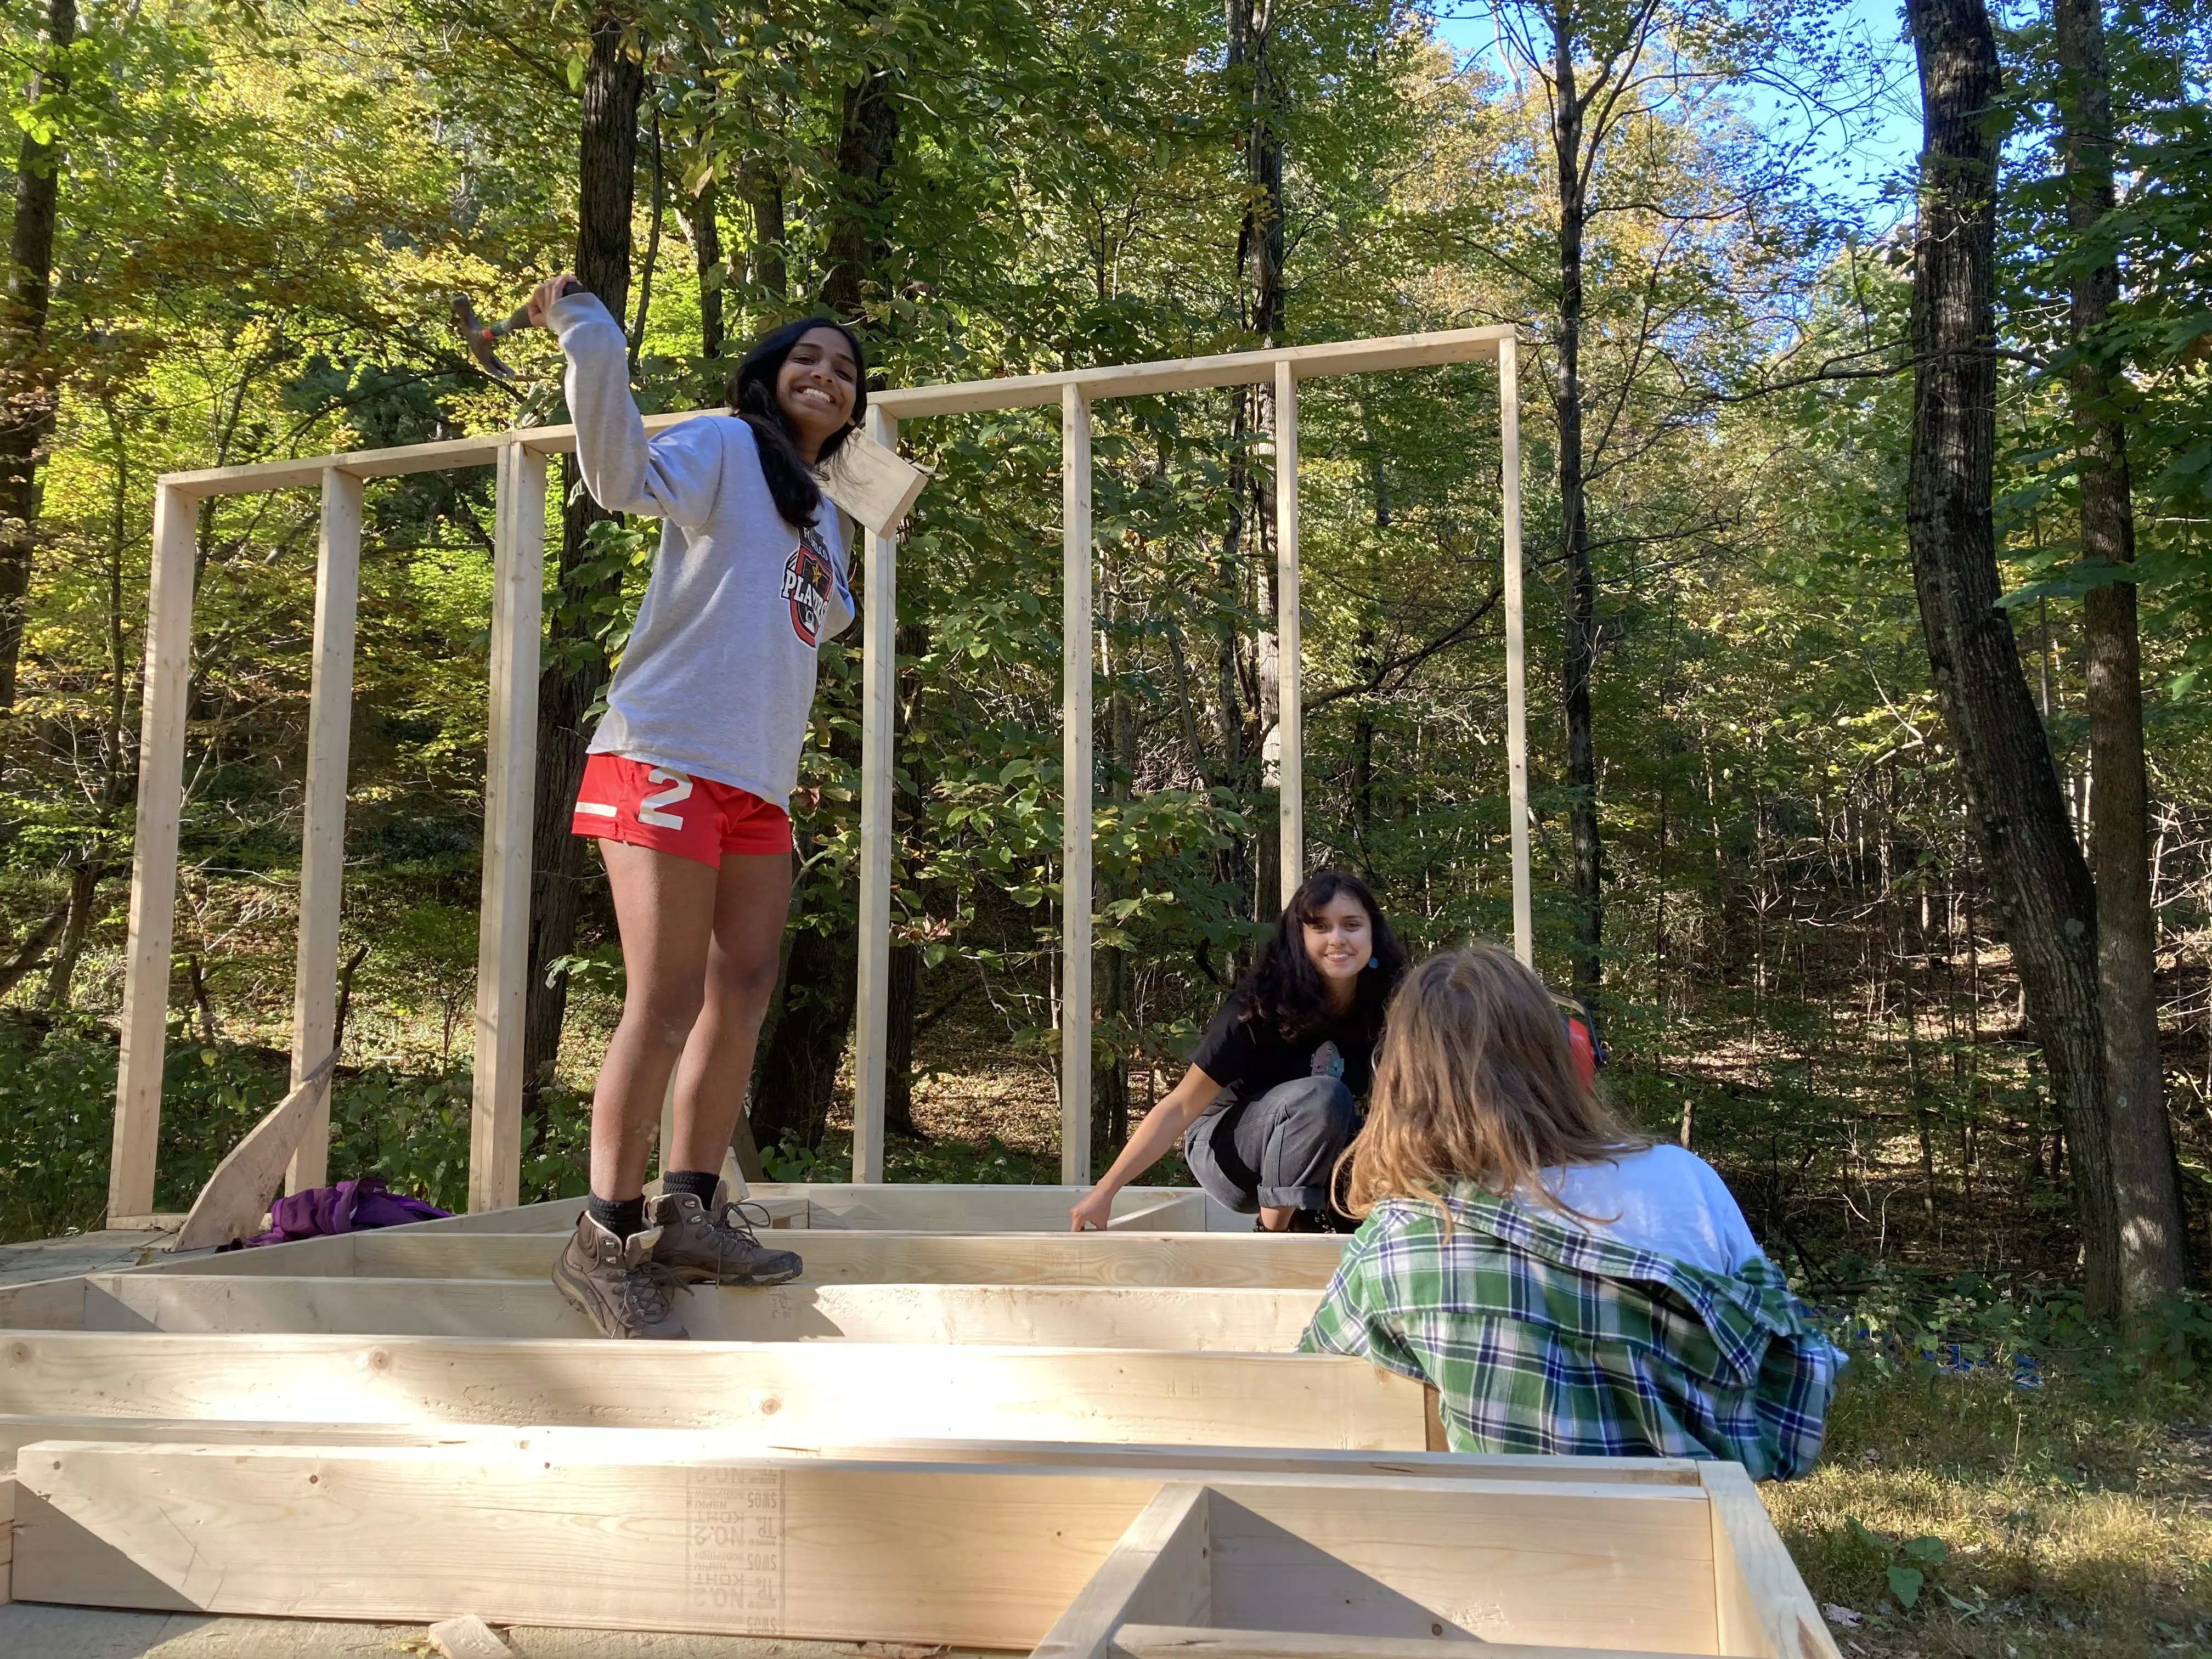 Odalys and two other people standing on the frame of a cabin!